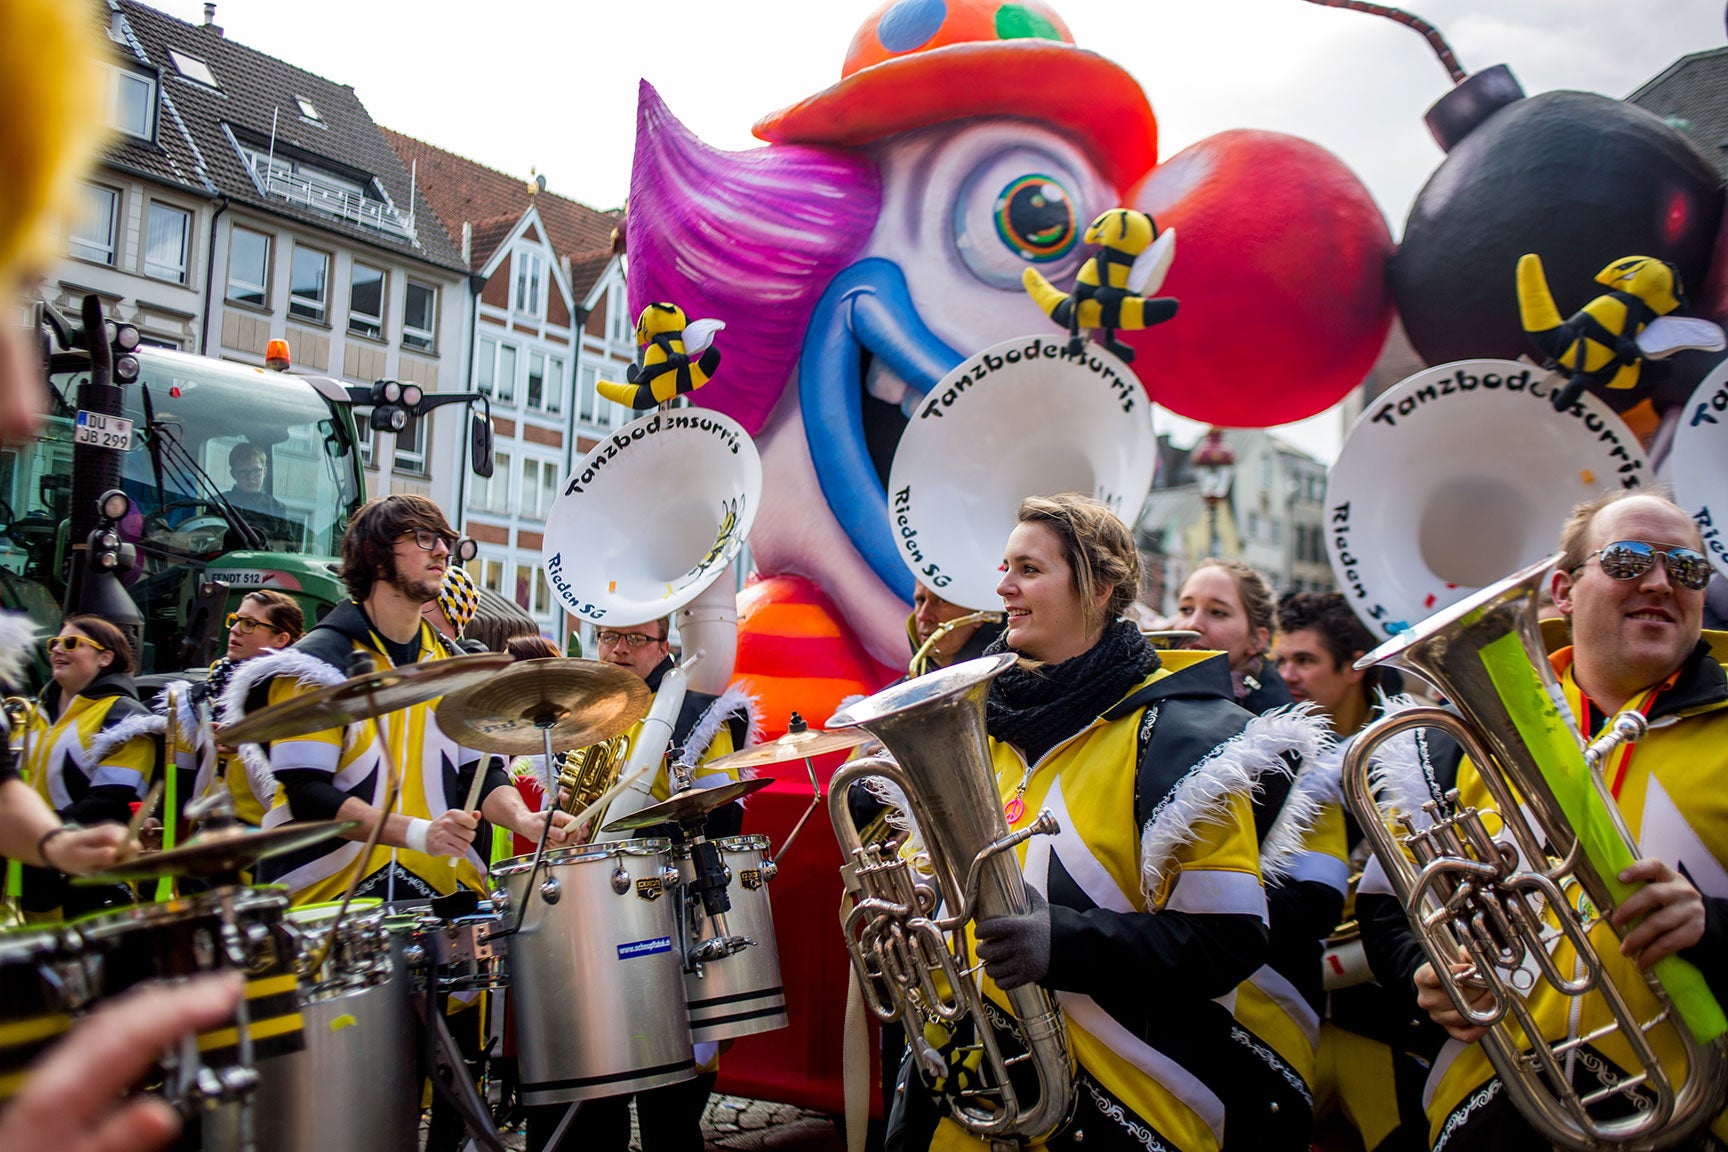 Did You Know Germany Has Carnival Too? A Look Inside